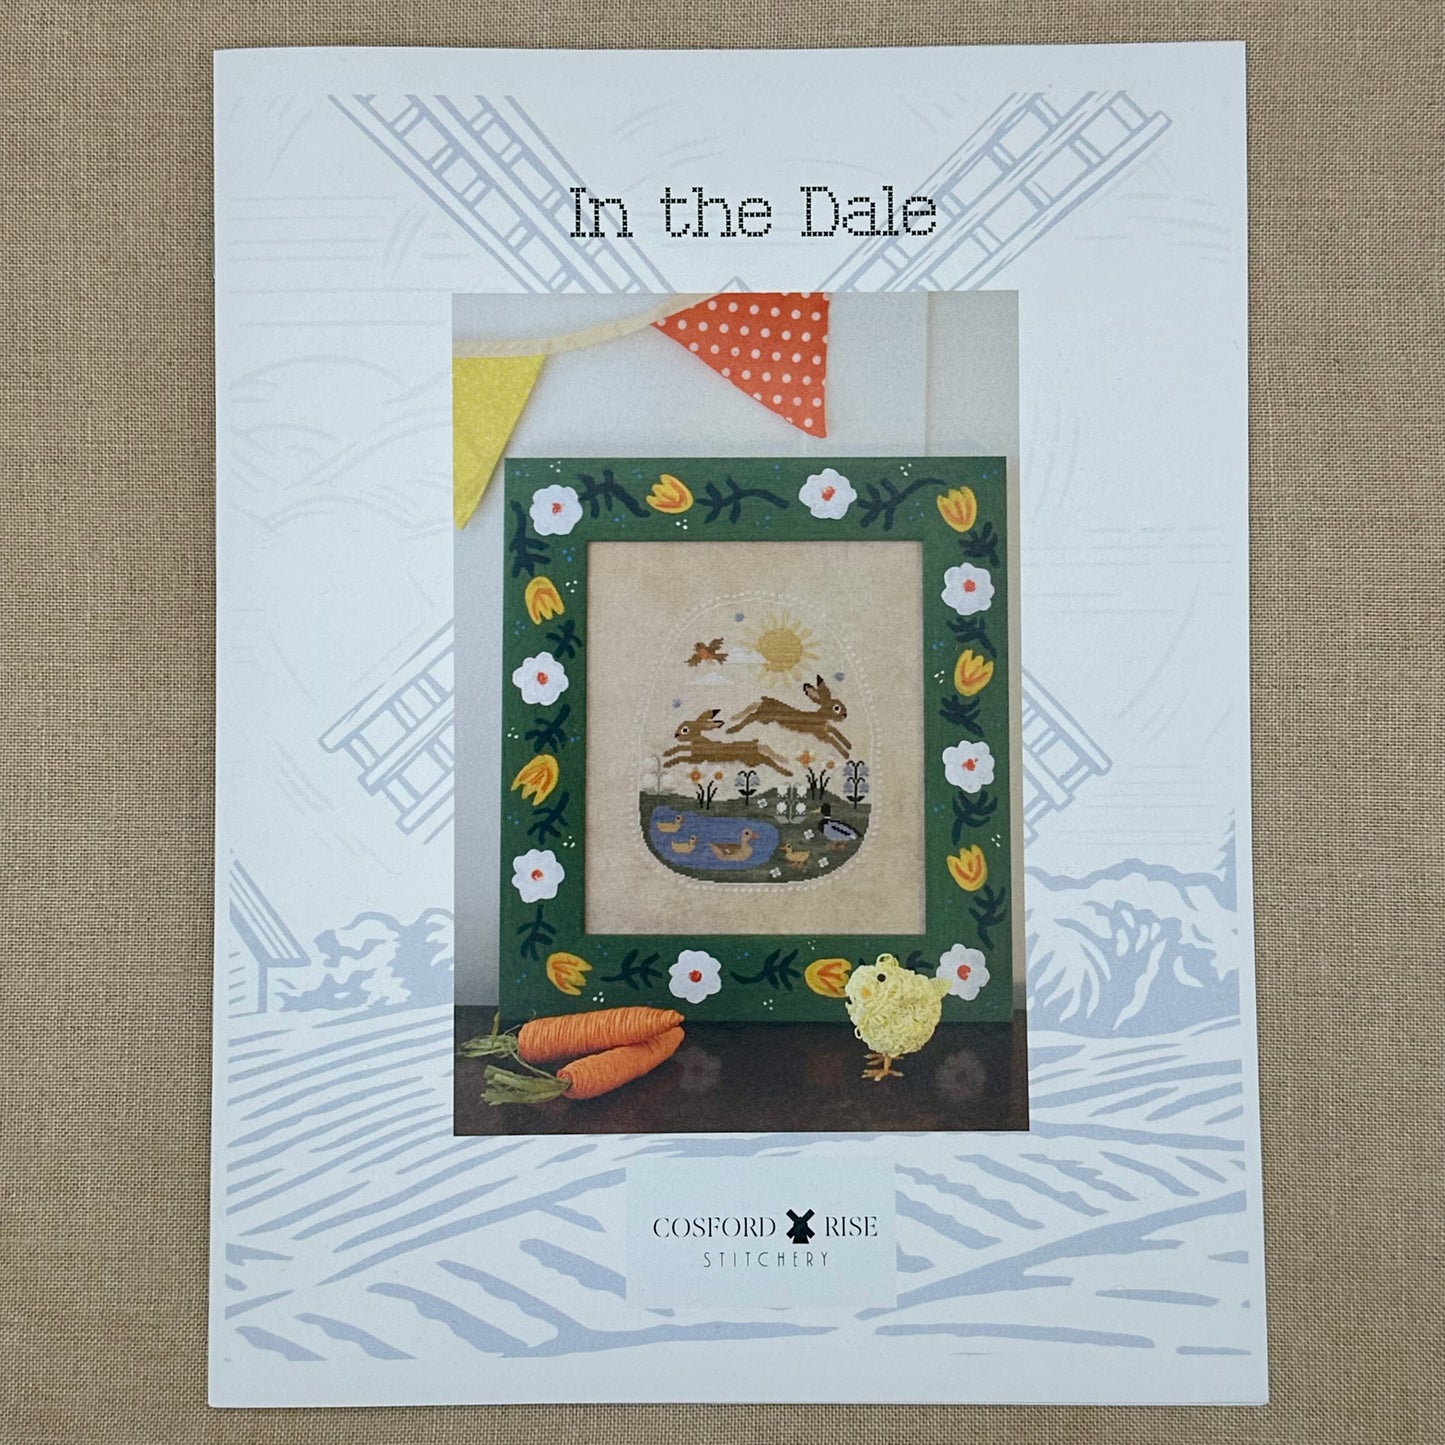 Cosford Rise Stitchery - In the Dale - Booklet Chart and/or Roxy Floss Pack